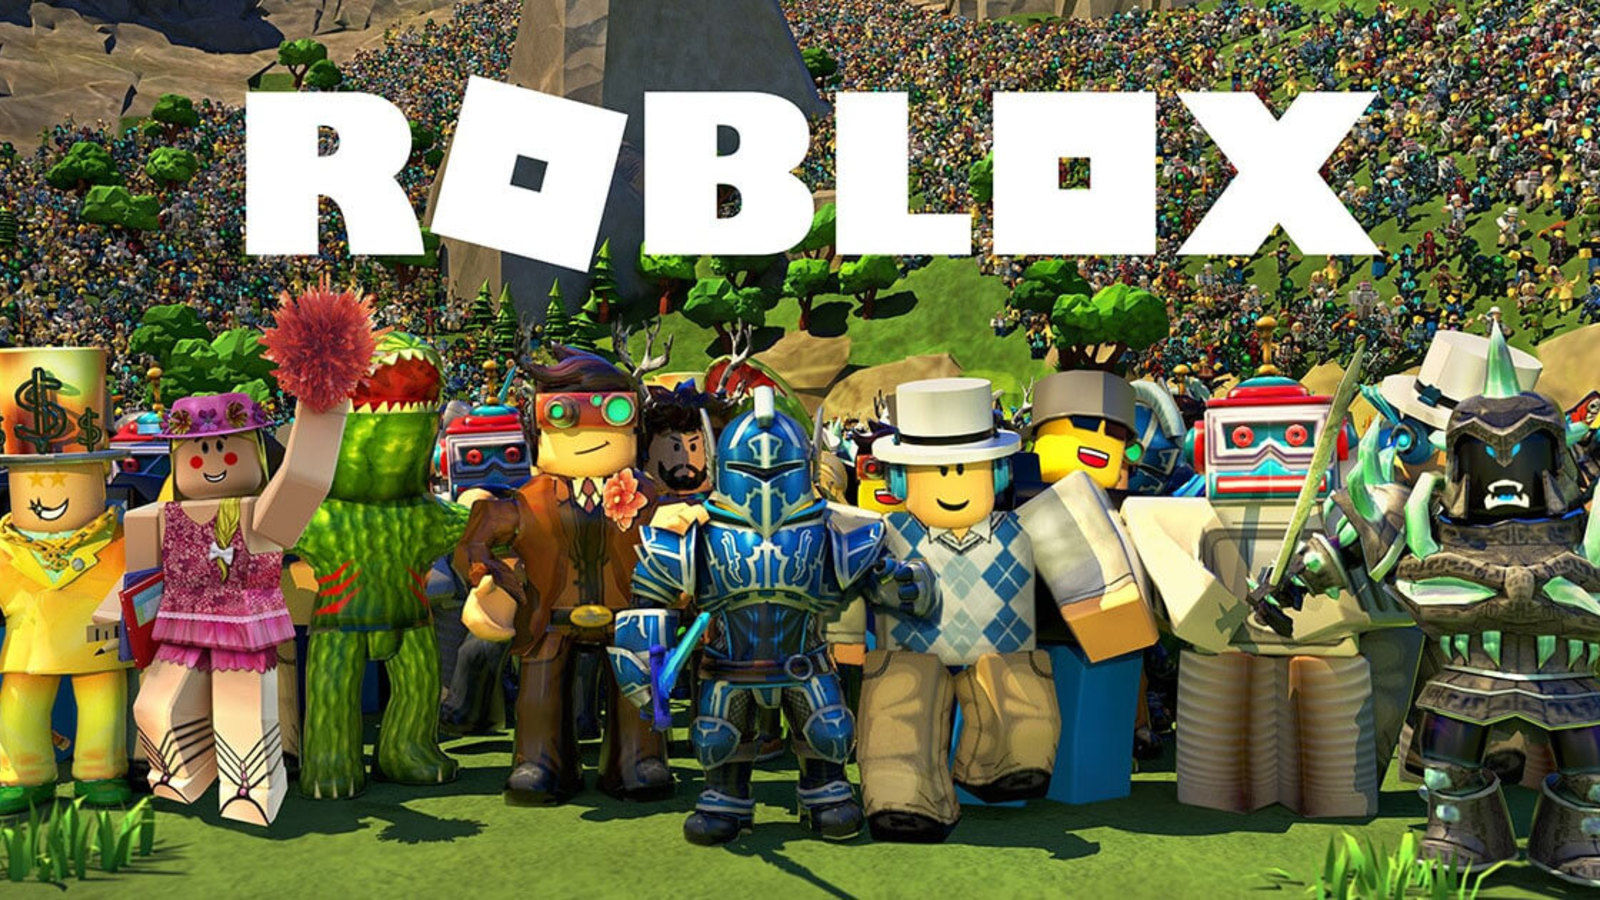 Download Roblox